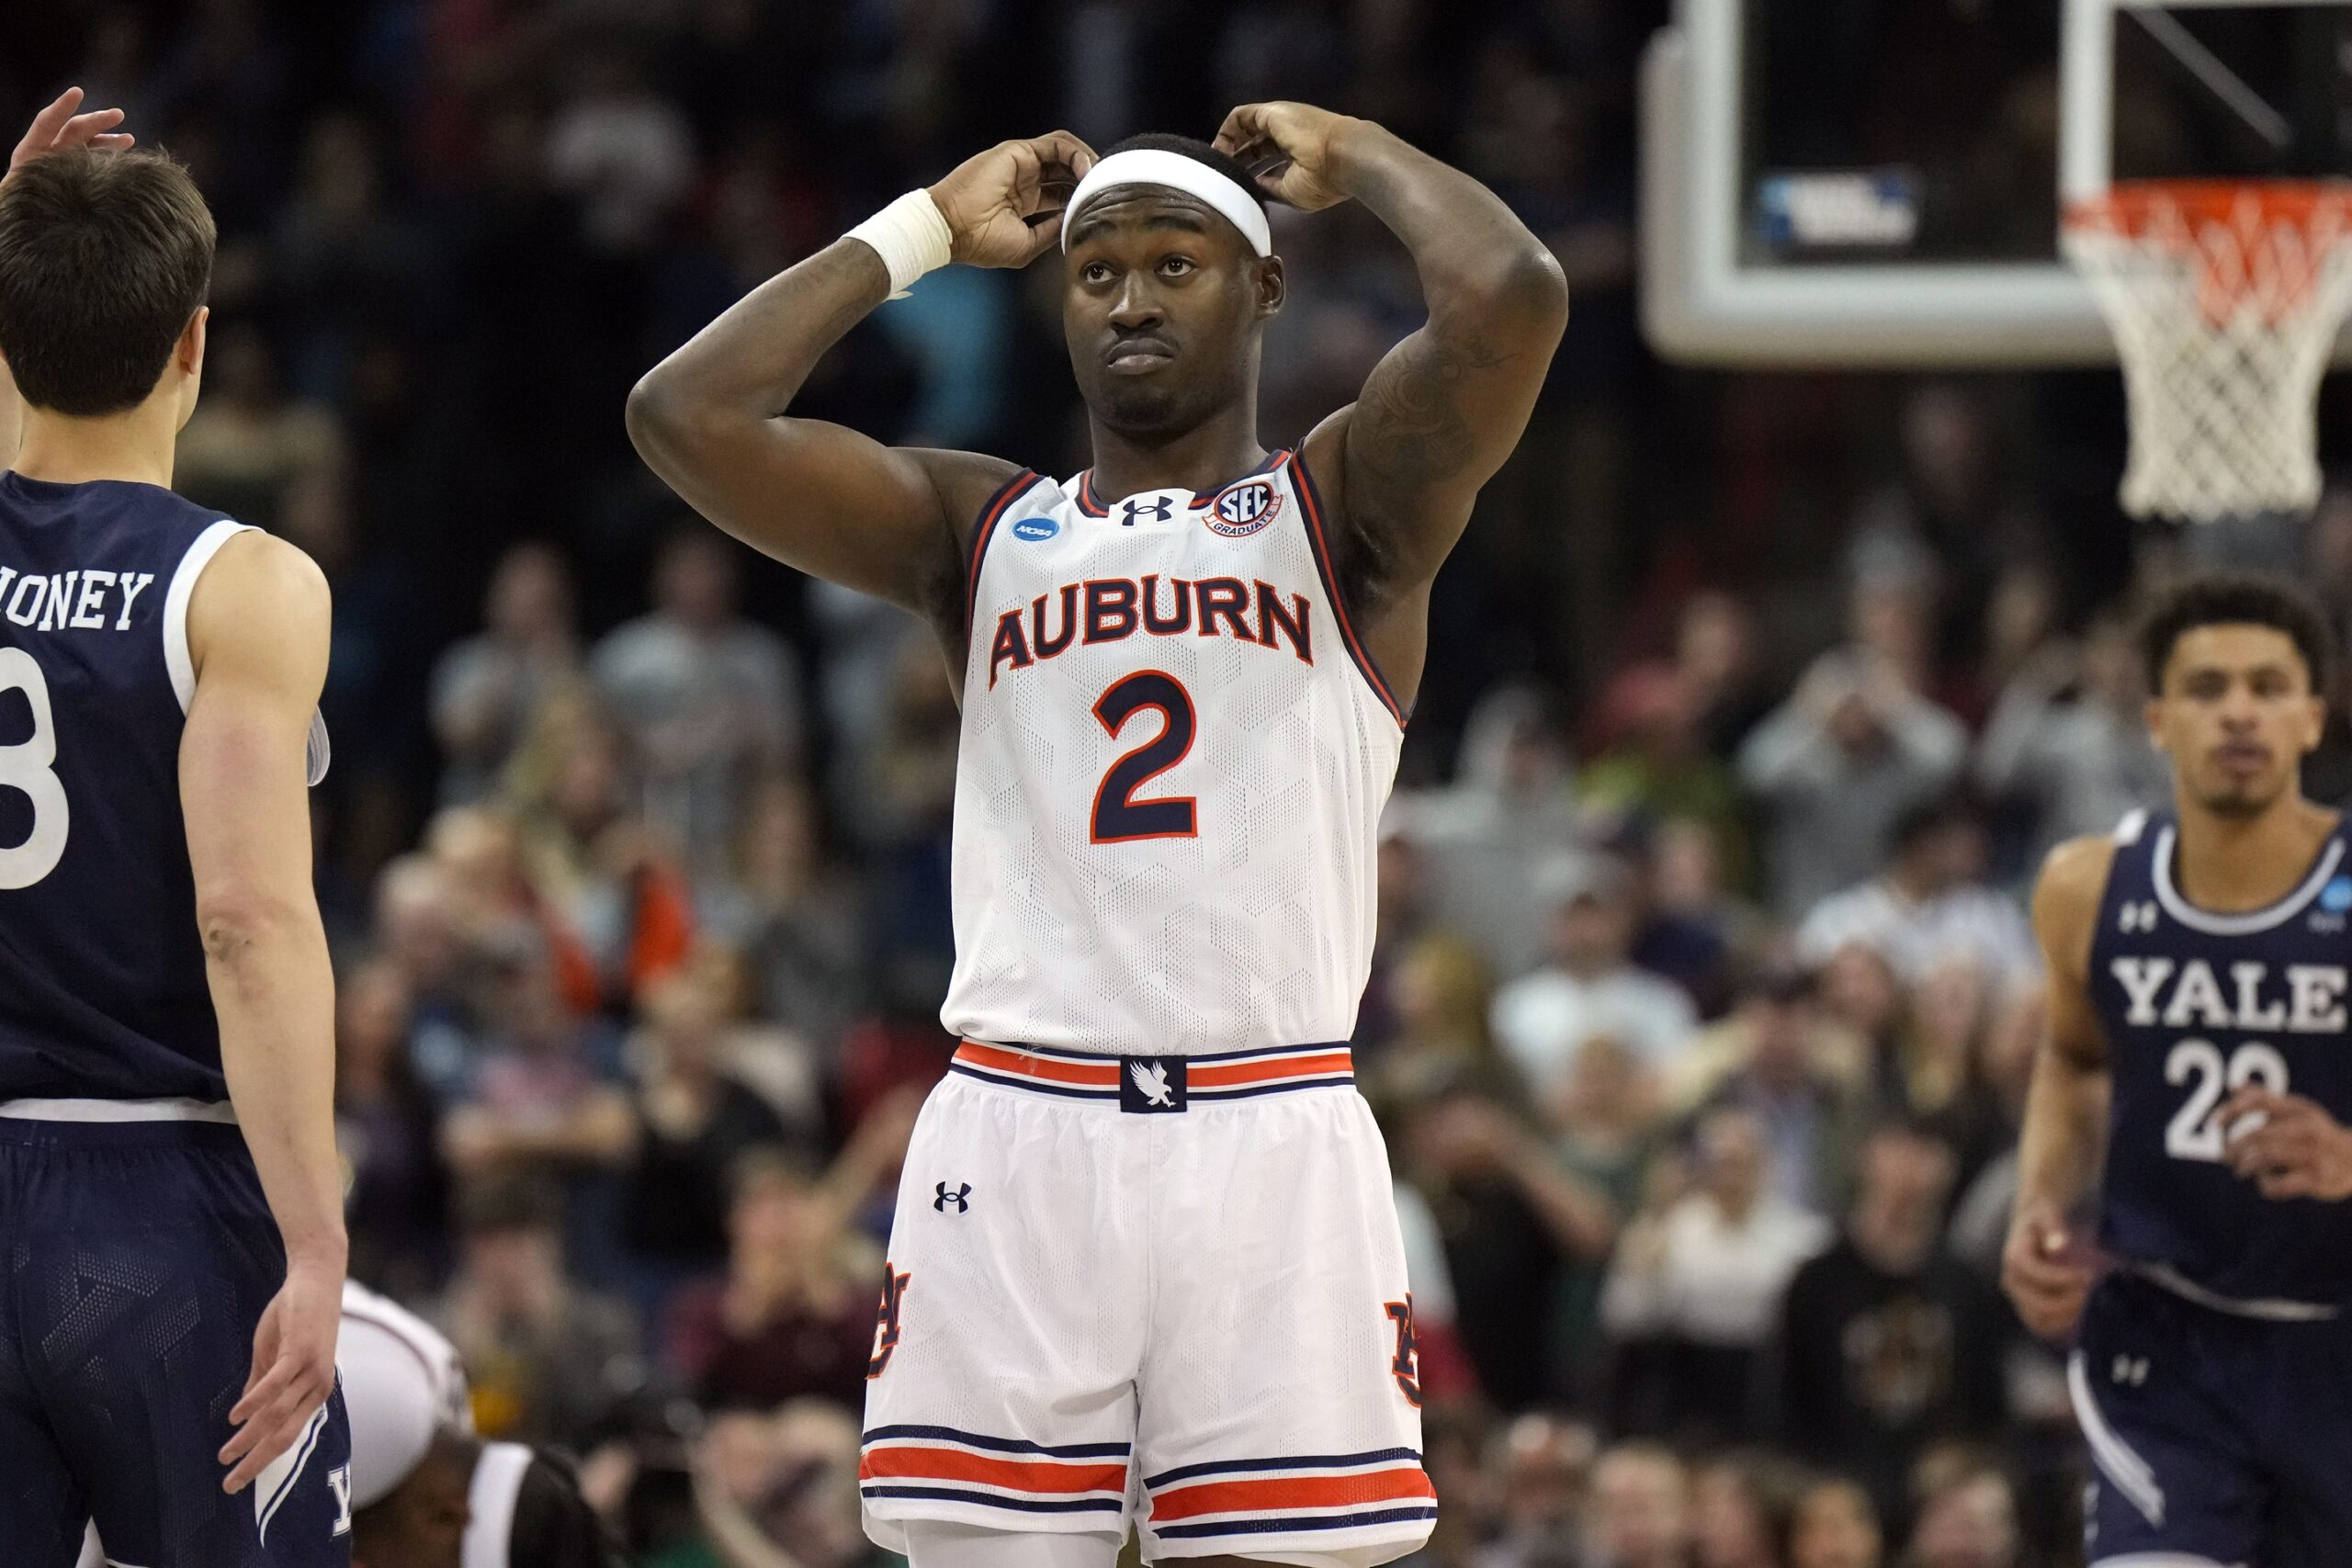 Auburn was eliminated in the first round of the NCAA tournament.